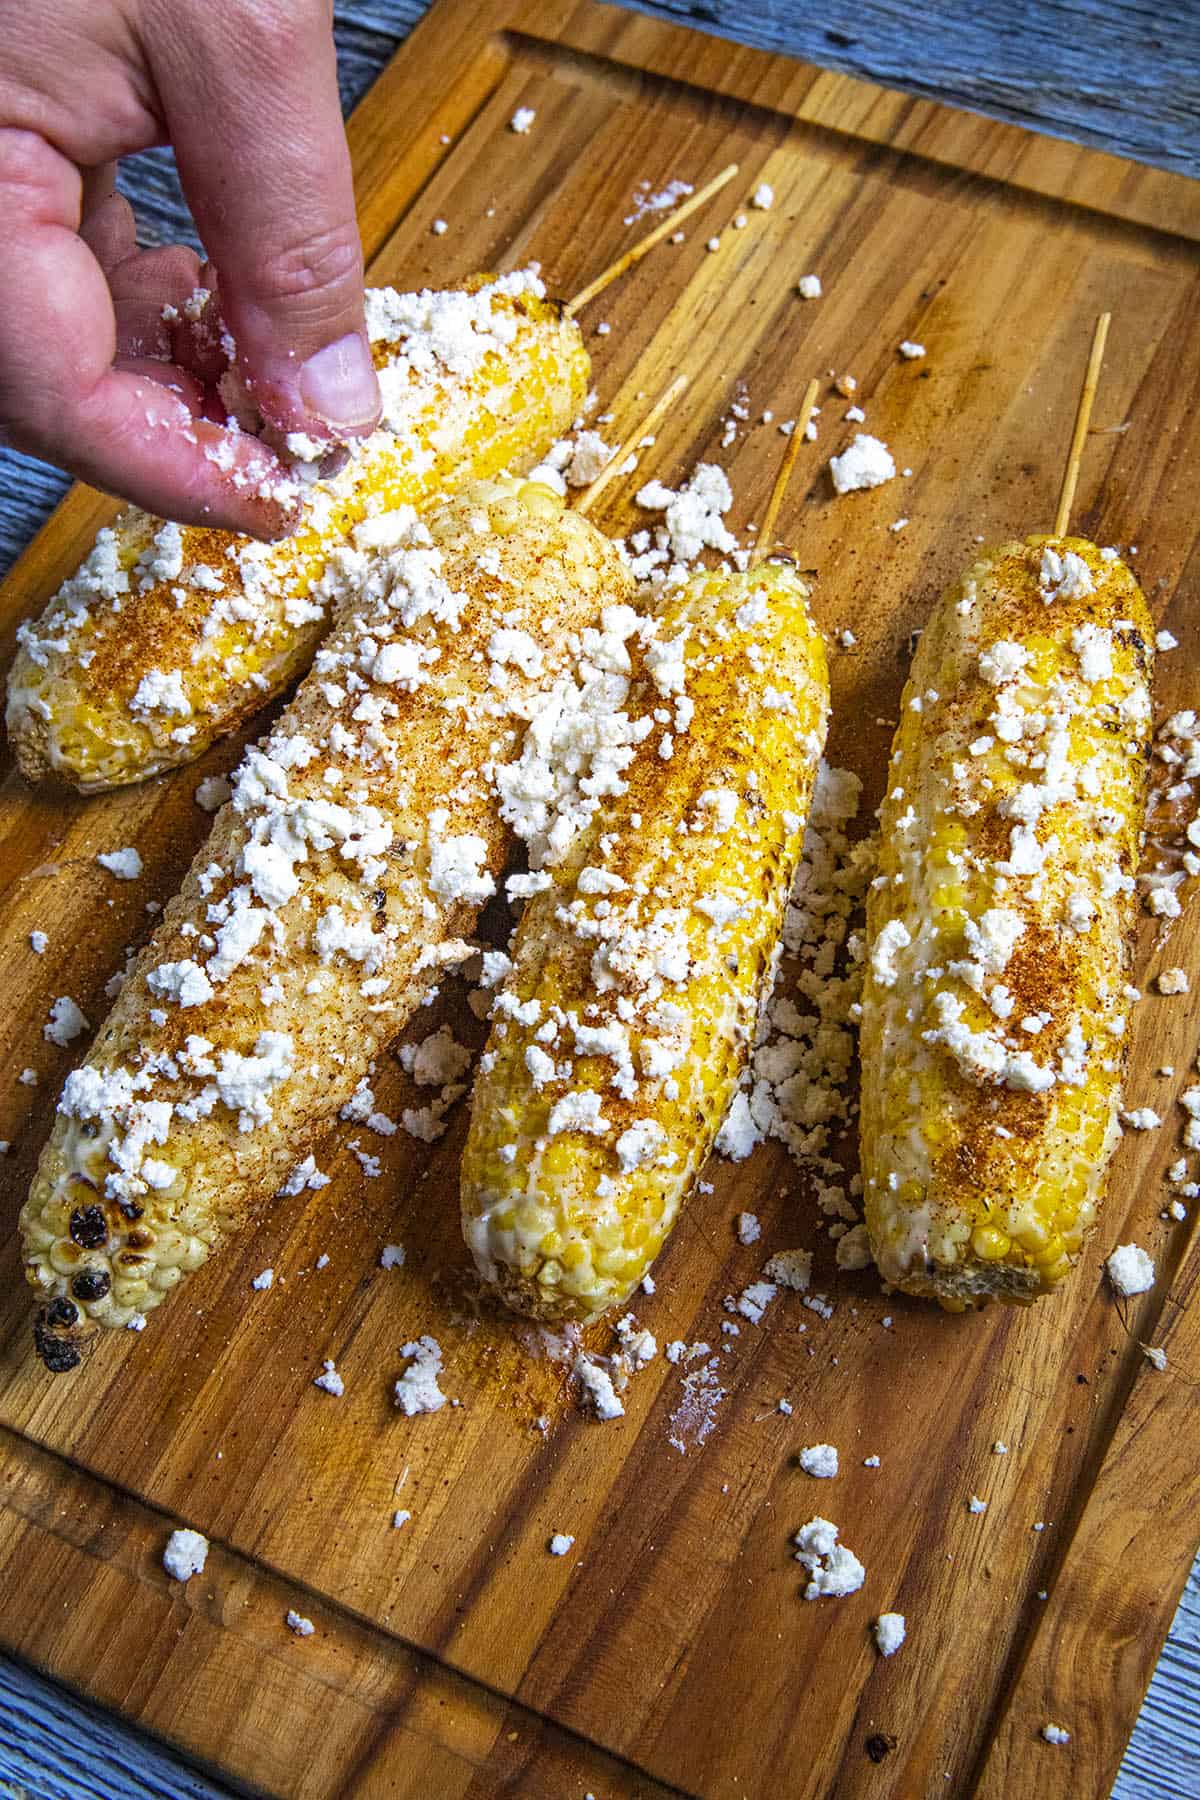 Coating the grilled corn with crumbly white cheese